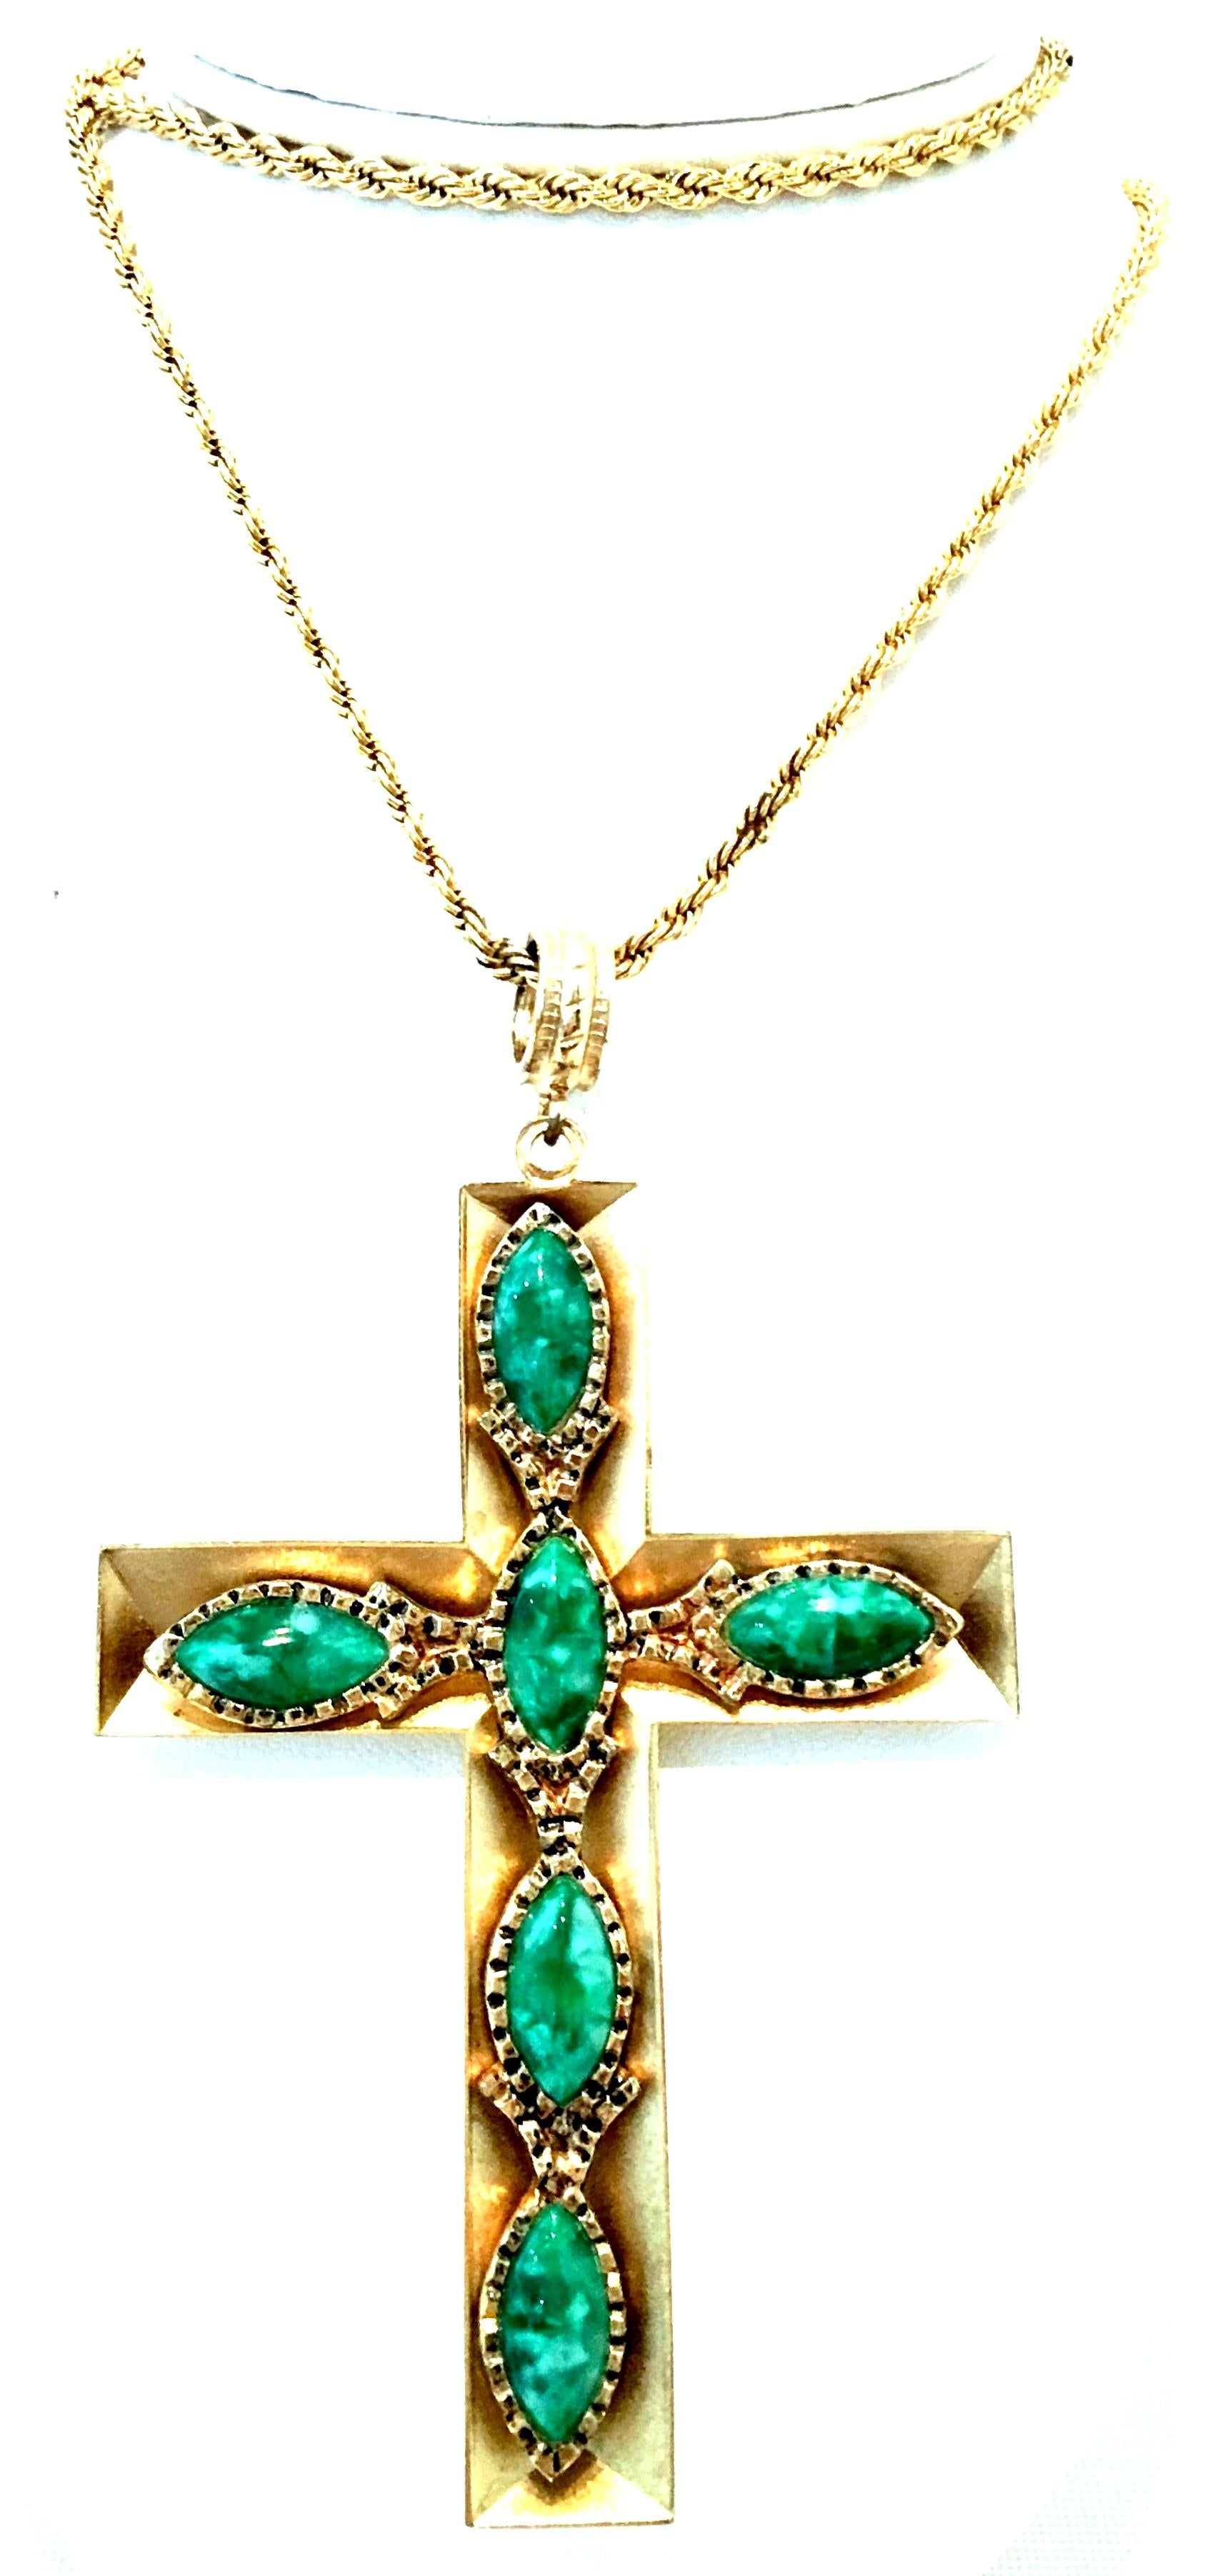 20th Century Gold & Faux Malachite Crucifix Pendant Necklace By, Trifari In Good Condition For Sale In West Palm Beach, FL